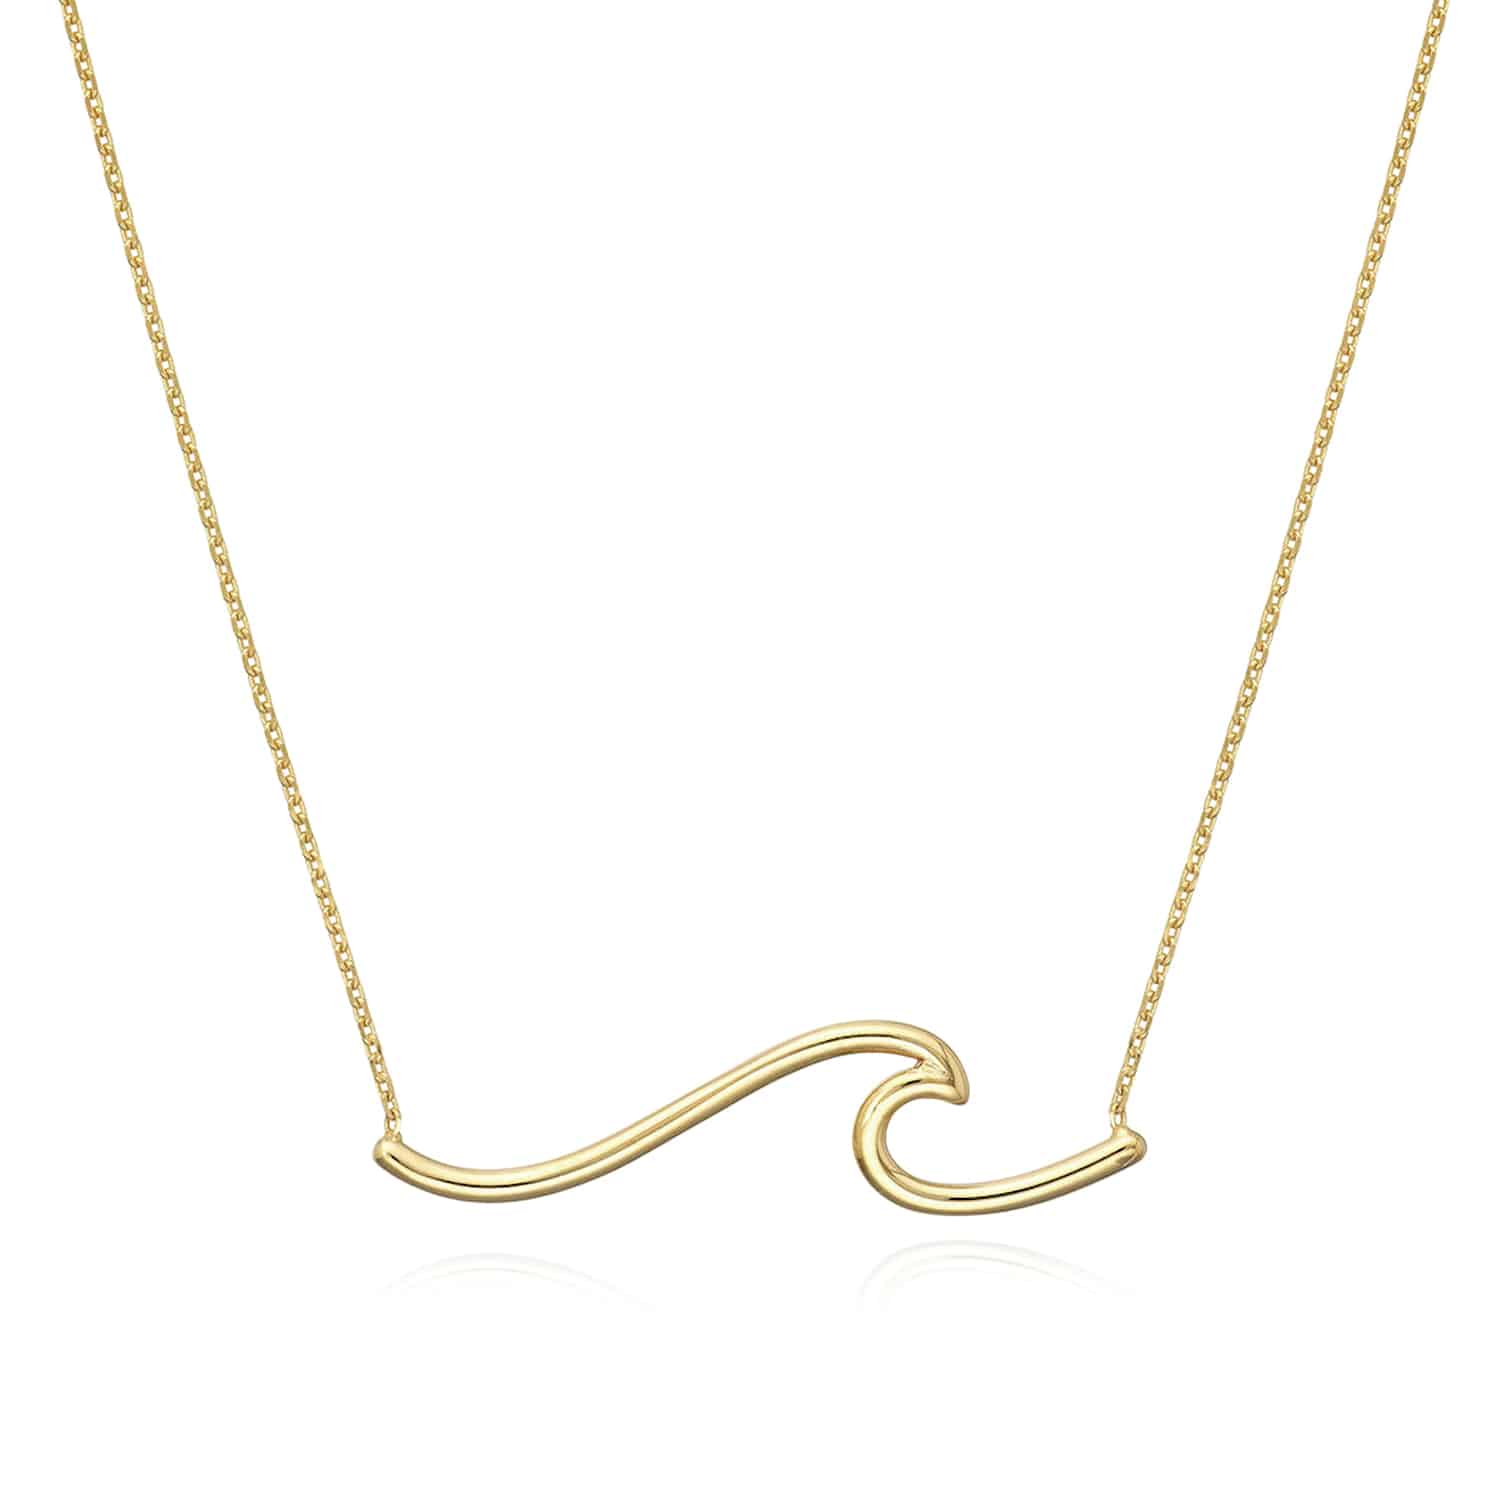 14K Gold Yellow White Wave Symbol Pendant Necklace 16"-18" Adjustable - Yellow Gold